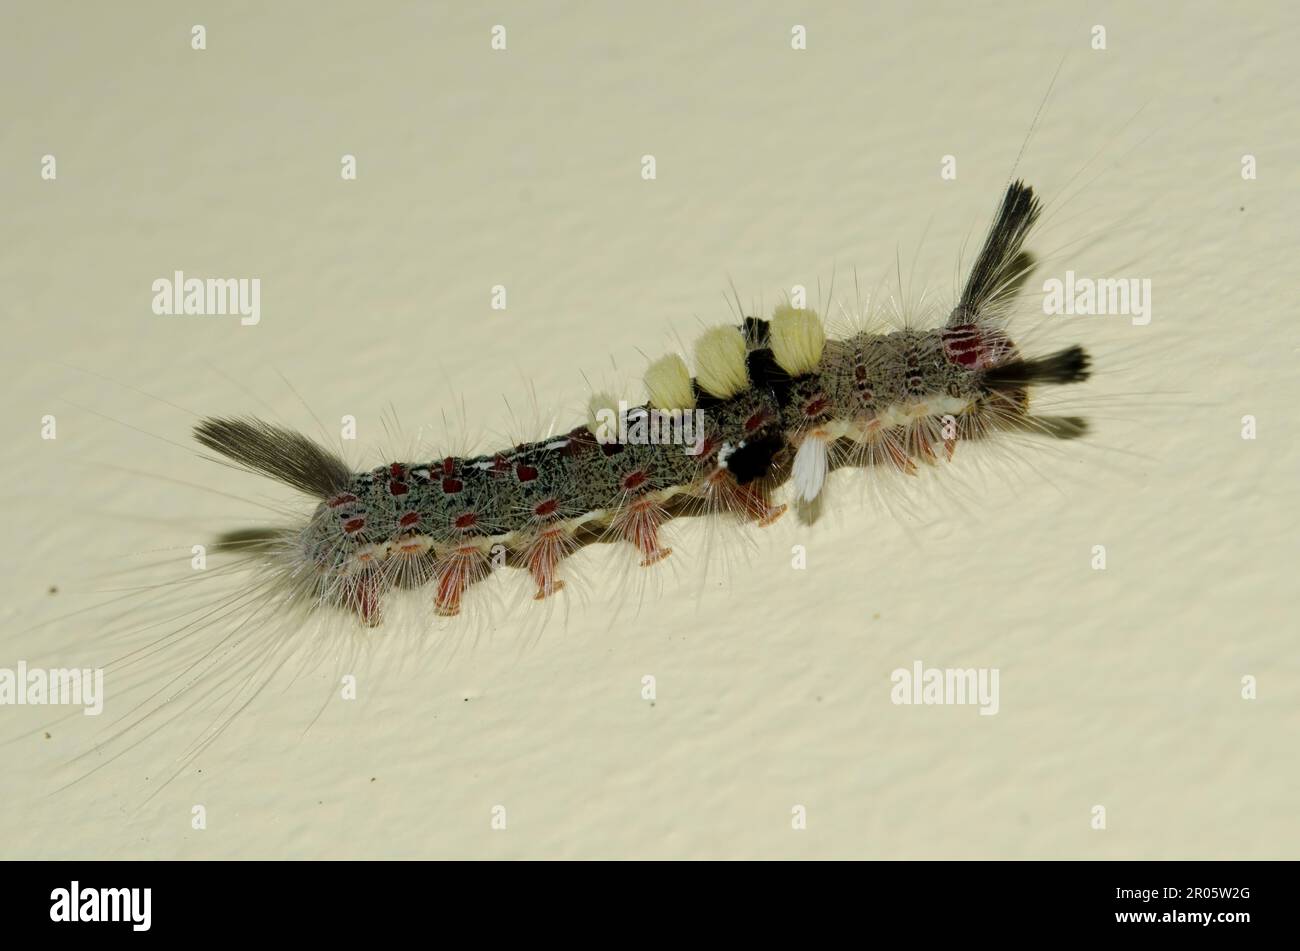 Tussock Moth Caterpillar, Lymantriidae Family, with long hairs for protection on wall, Klungkung, Bali, Indonesia Stock Photo